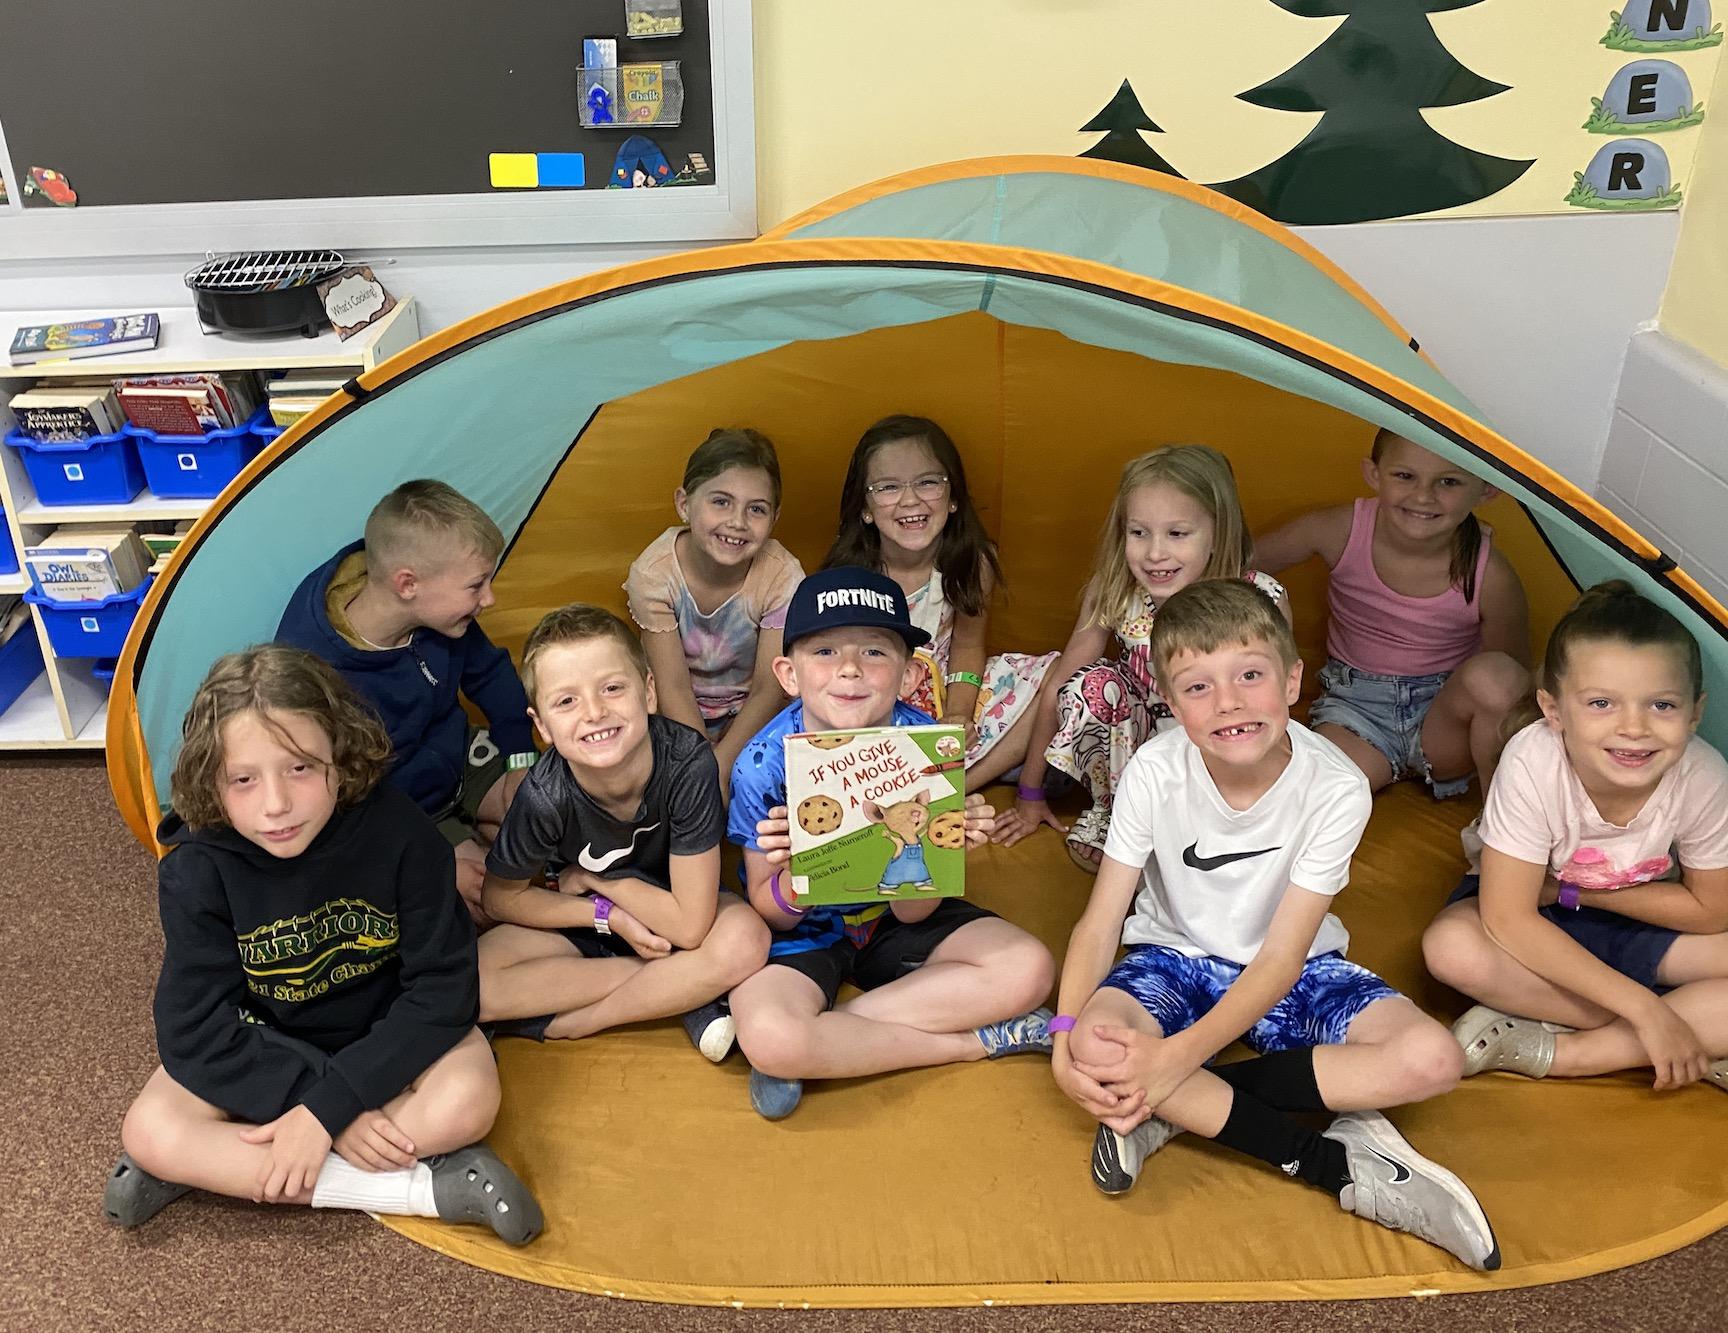 These 2nd-graders enjoyed reading together